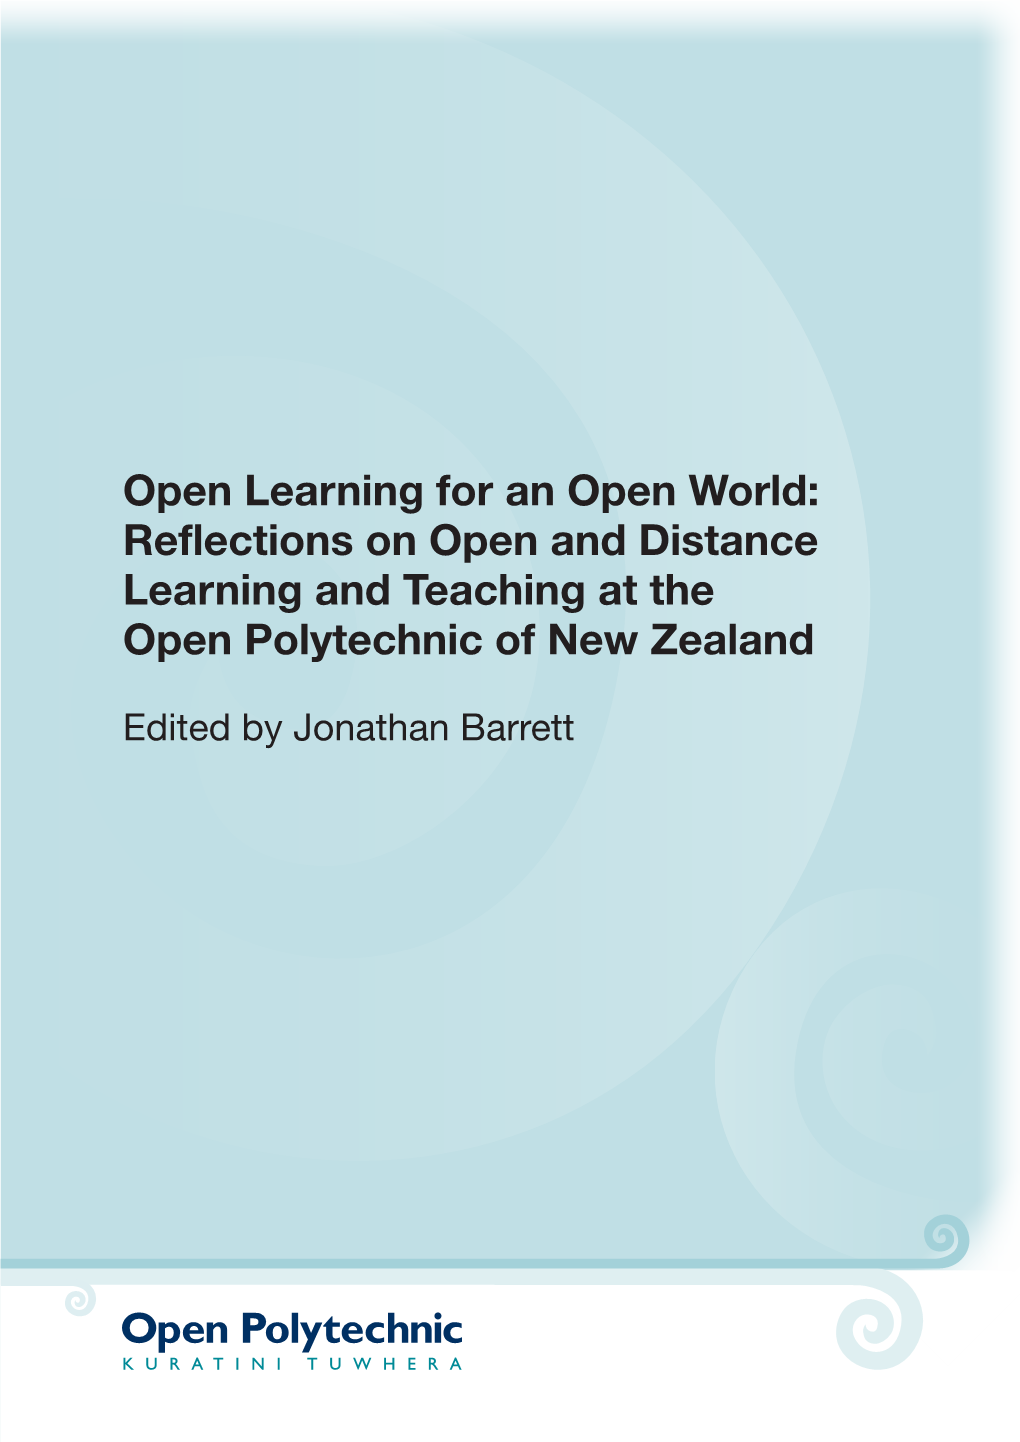 Open Learning for an Open World: Reflections on Open and Distance Learning and Teaching at the Open Polytechnic of New Zealand